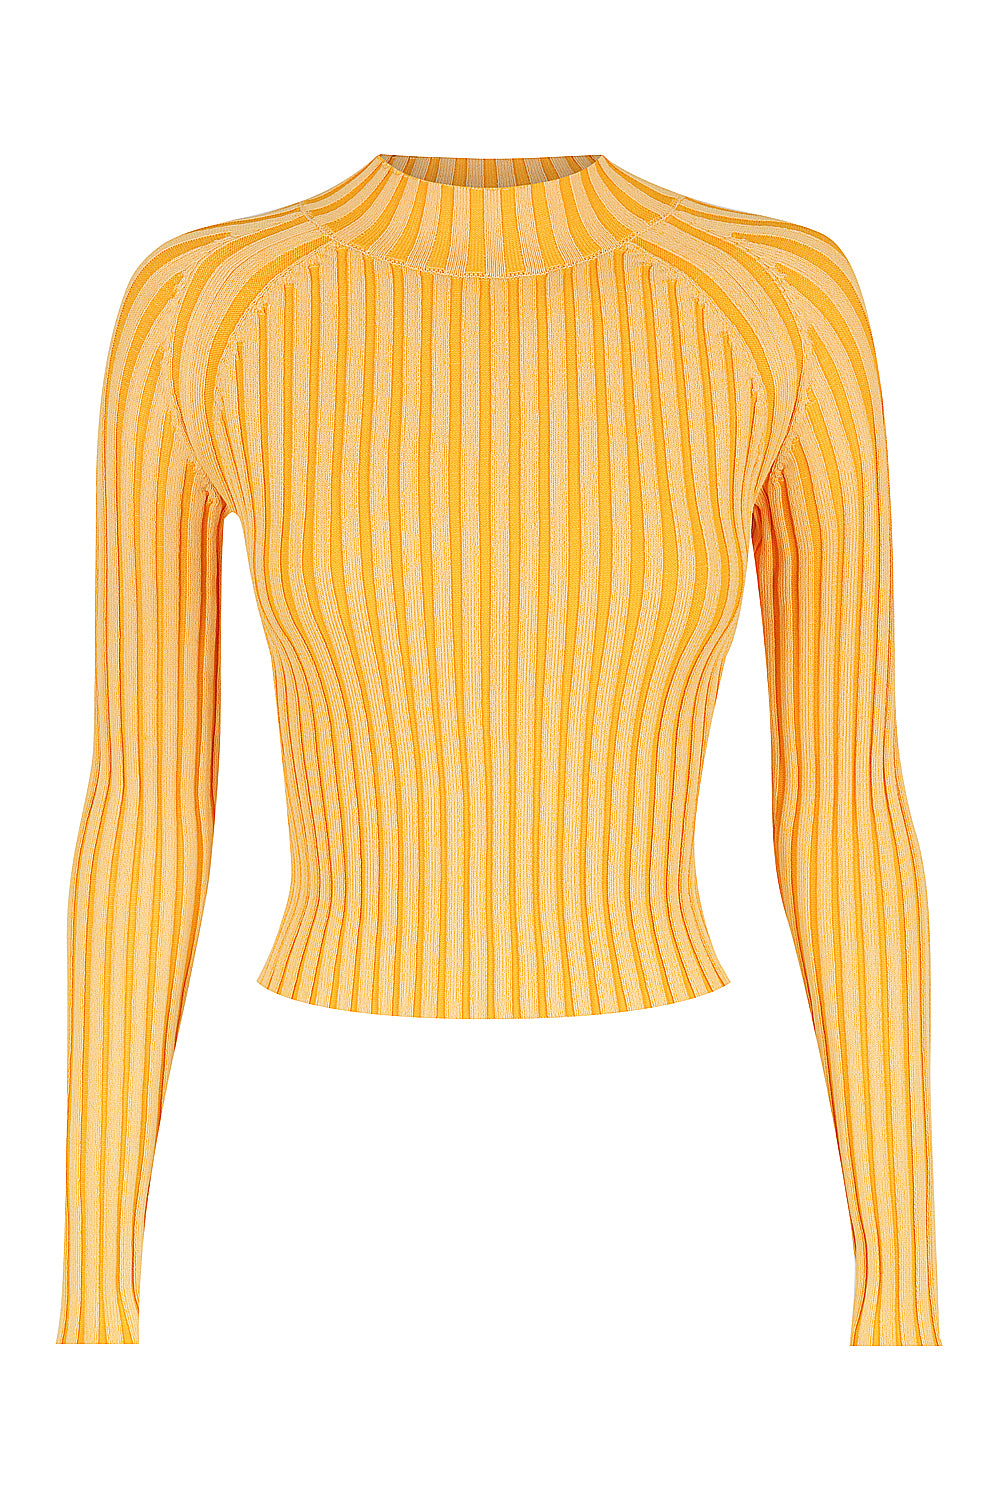 The All Sorts Two-Tone Knit Top - Orange Crush